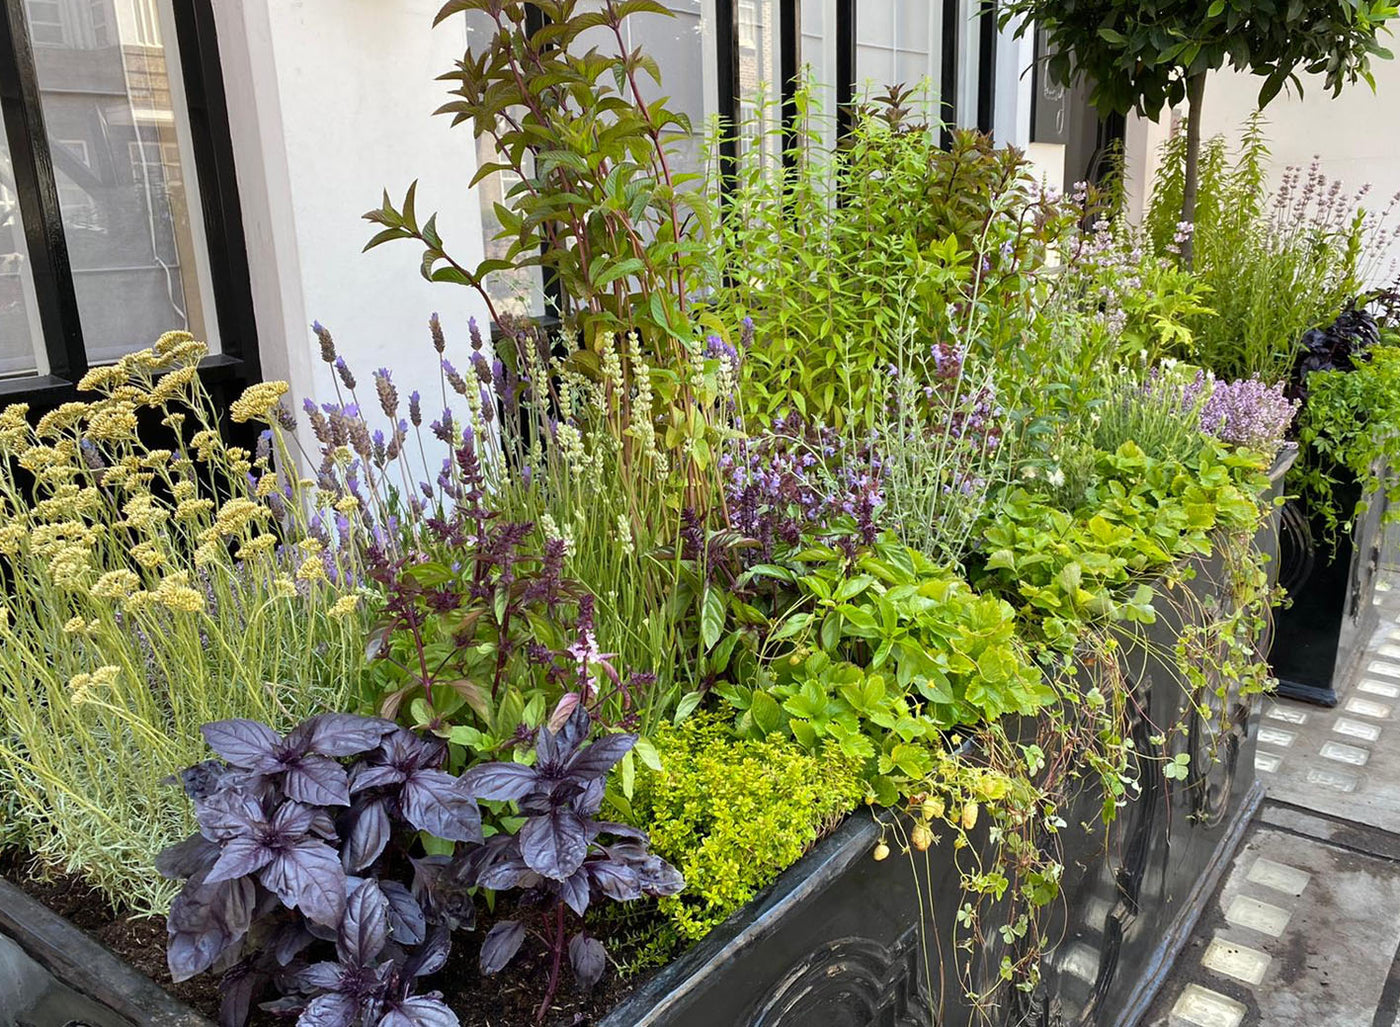 Jekka’s advice on growing herbs in containers and her top 10 herbs